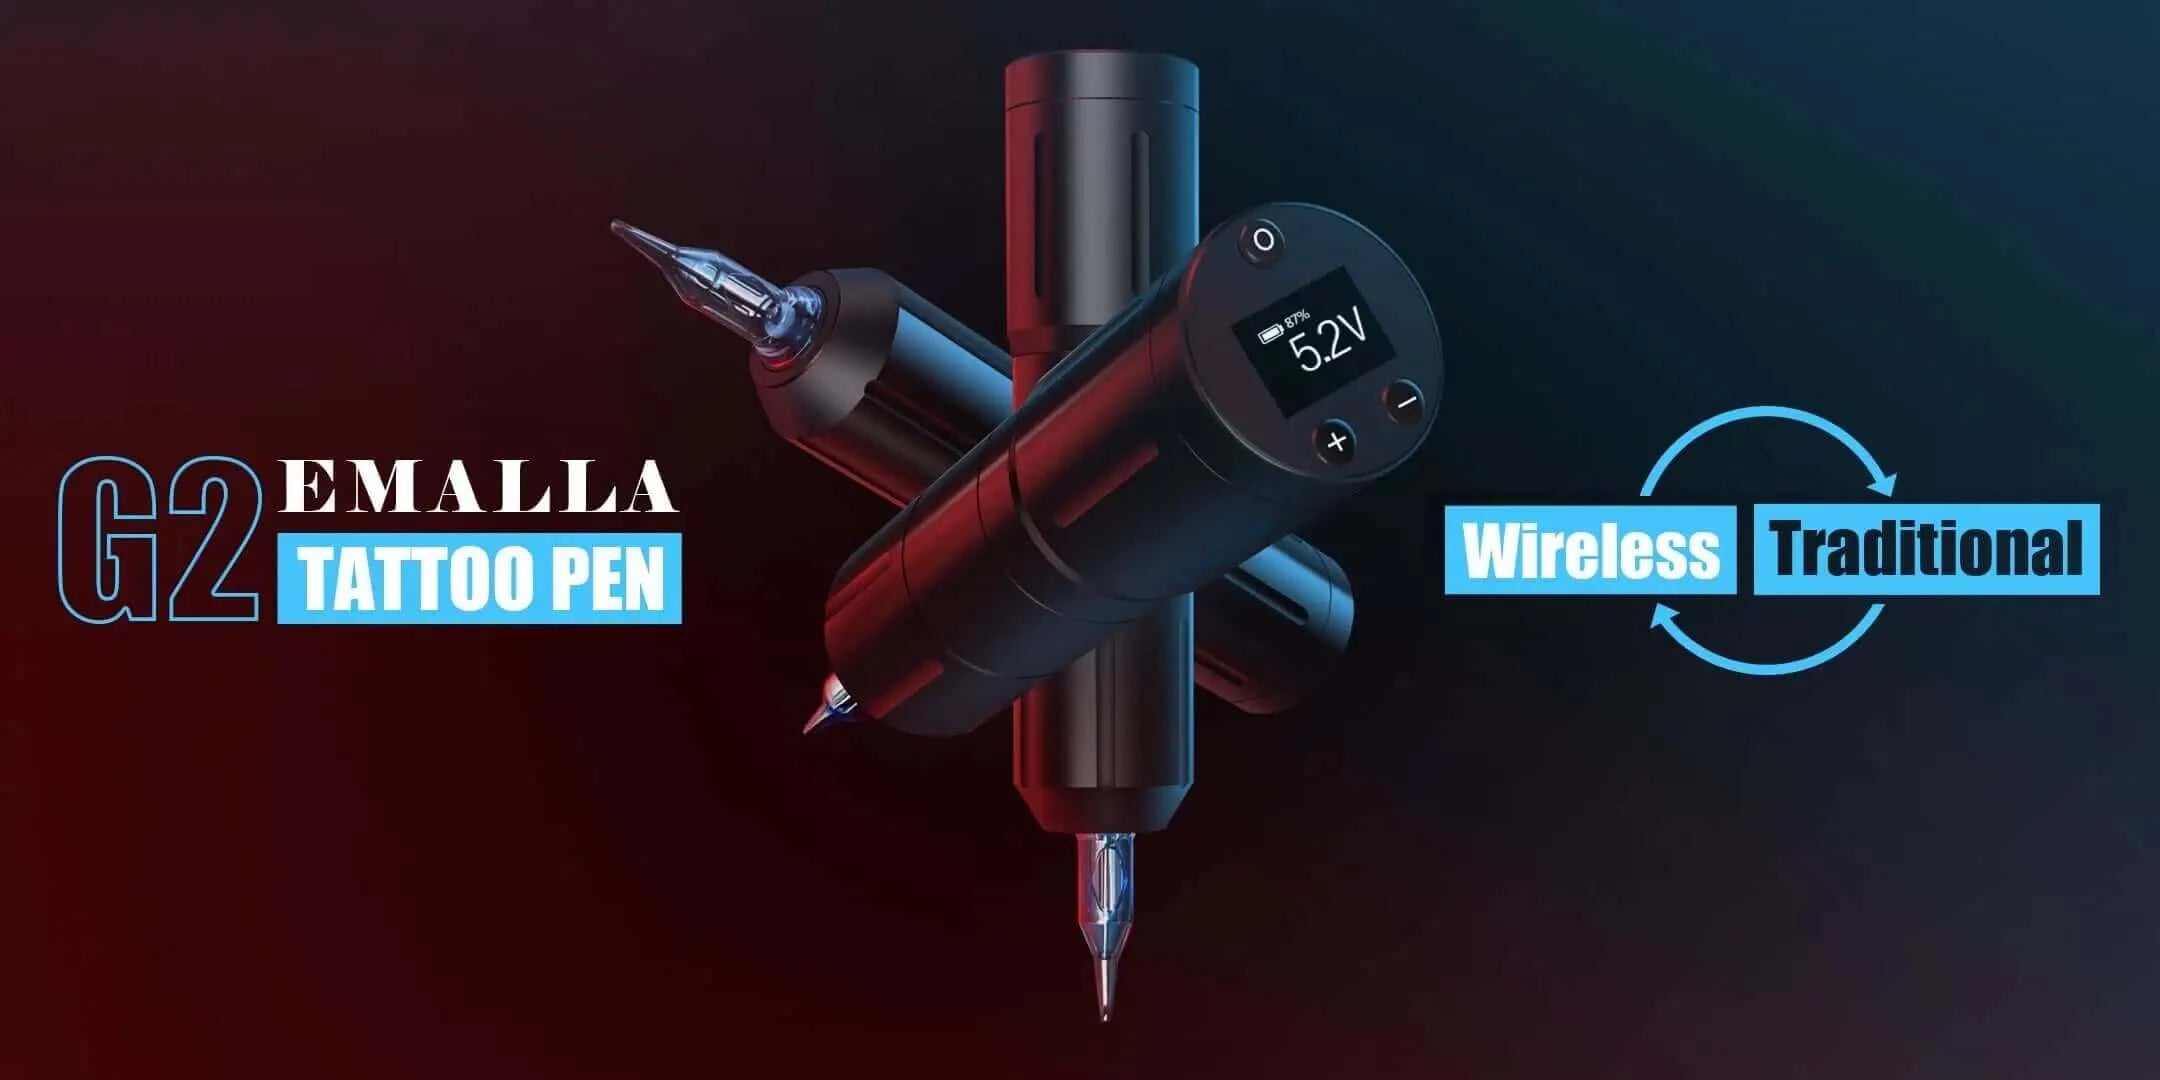 EMALLA G2 tattoo pen, high quality tattoo machine, which is wireless and traditional.